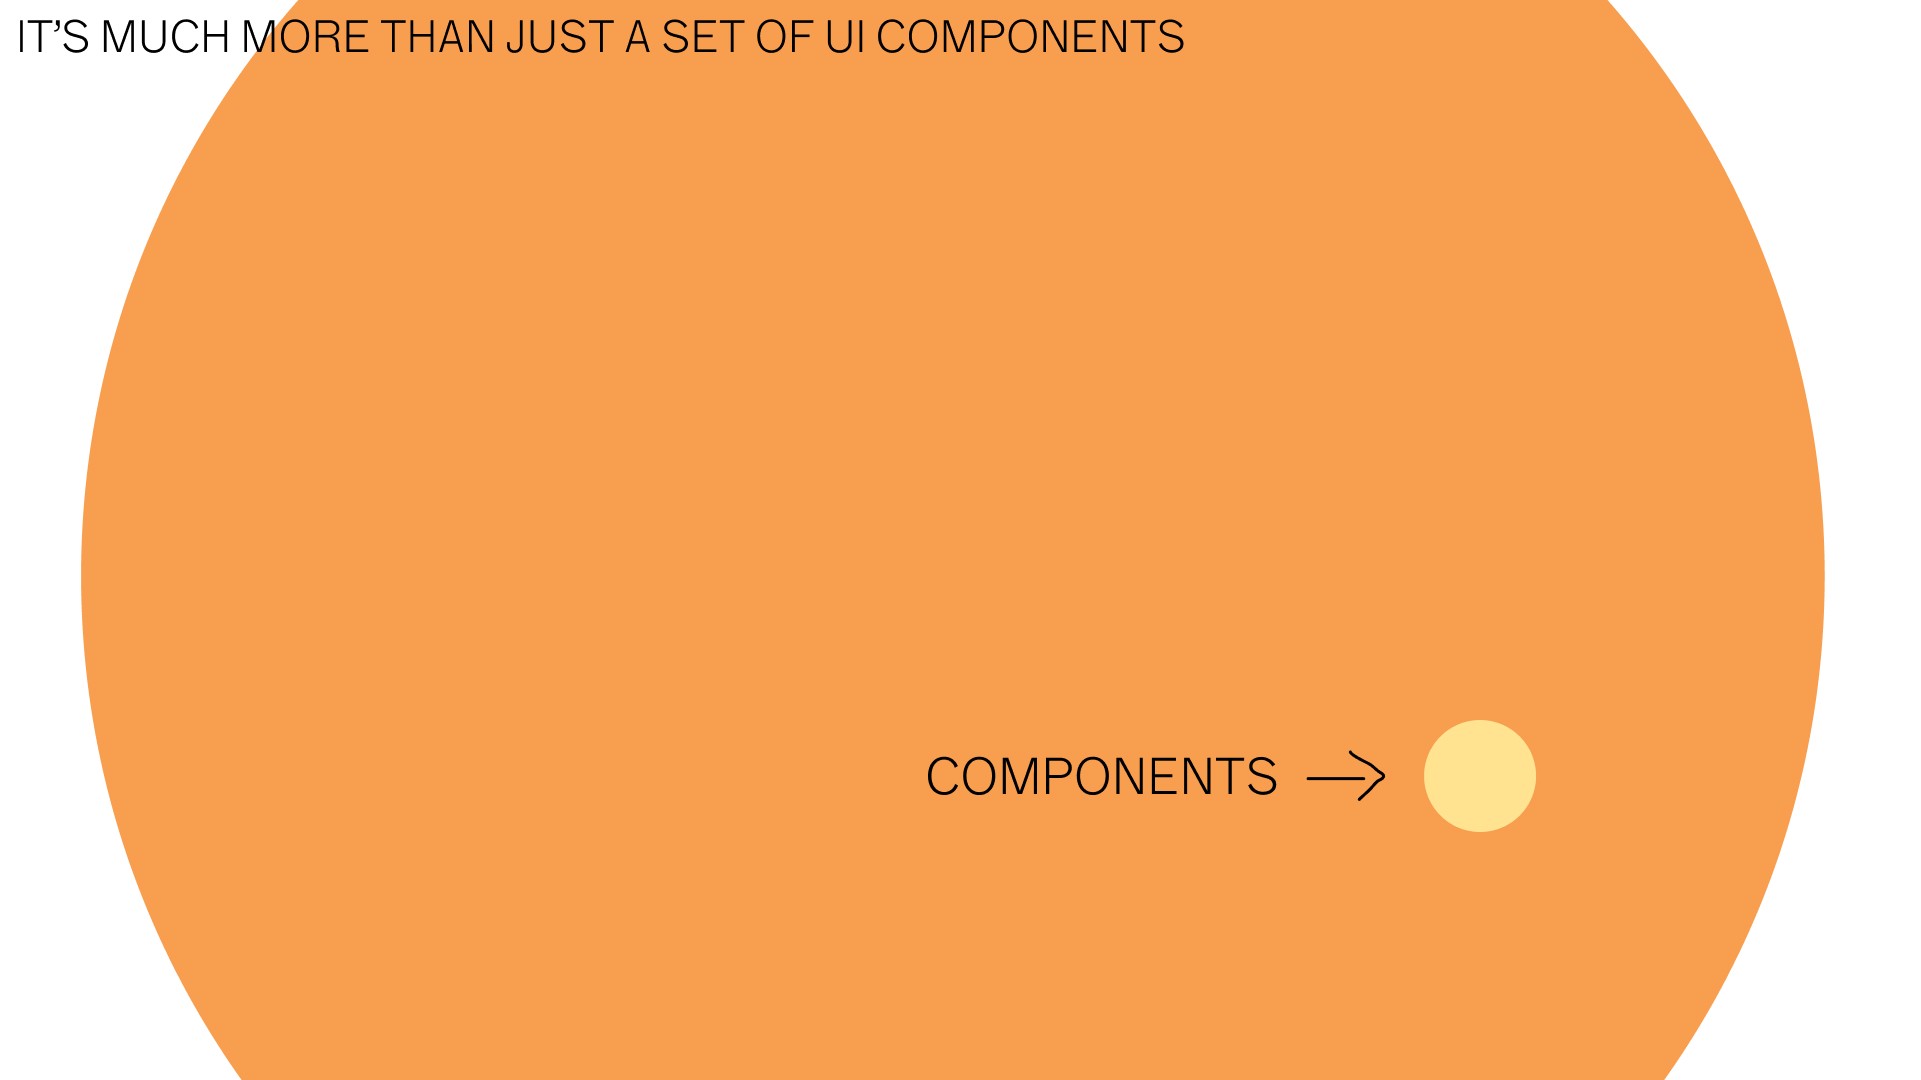 Diagram showing how visual component being just a very small fraction of a design system.